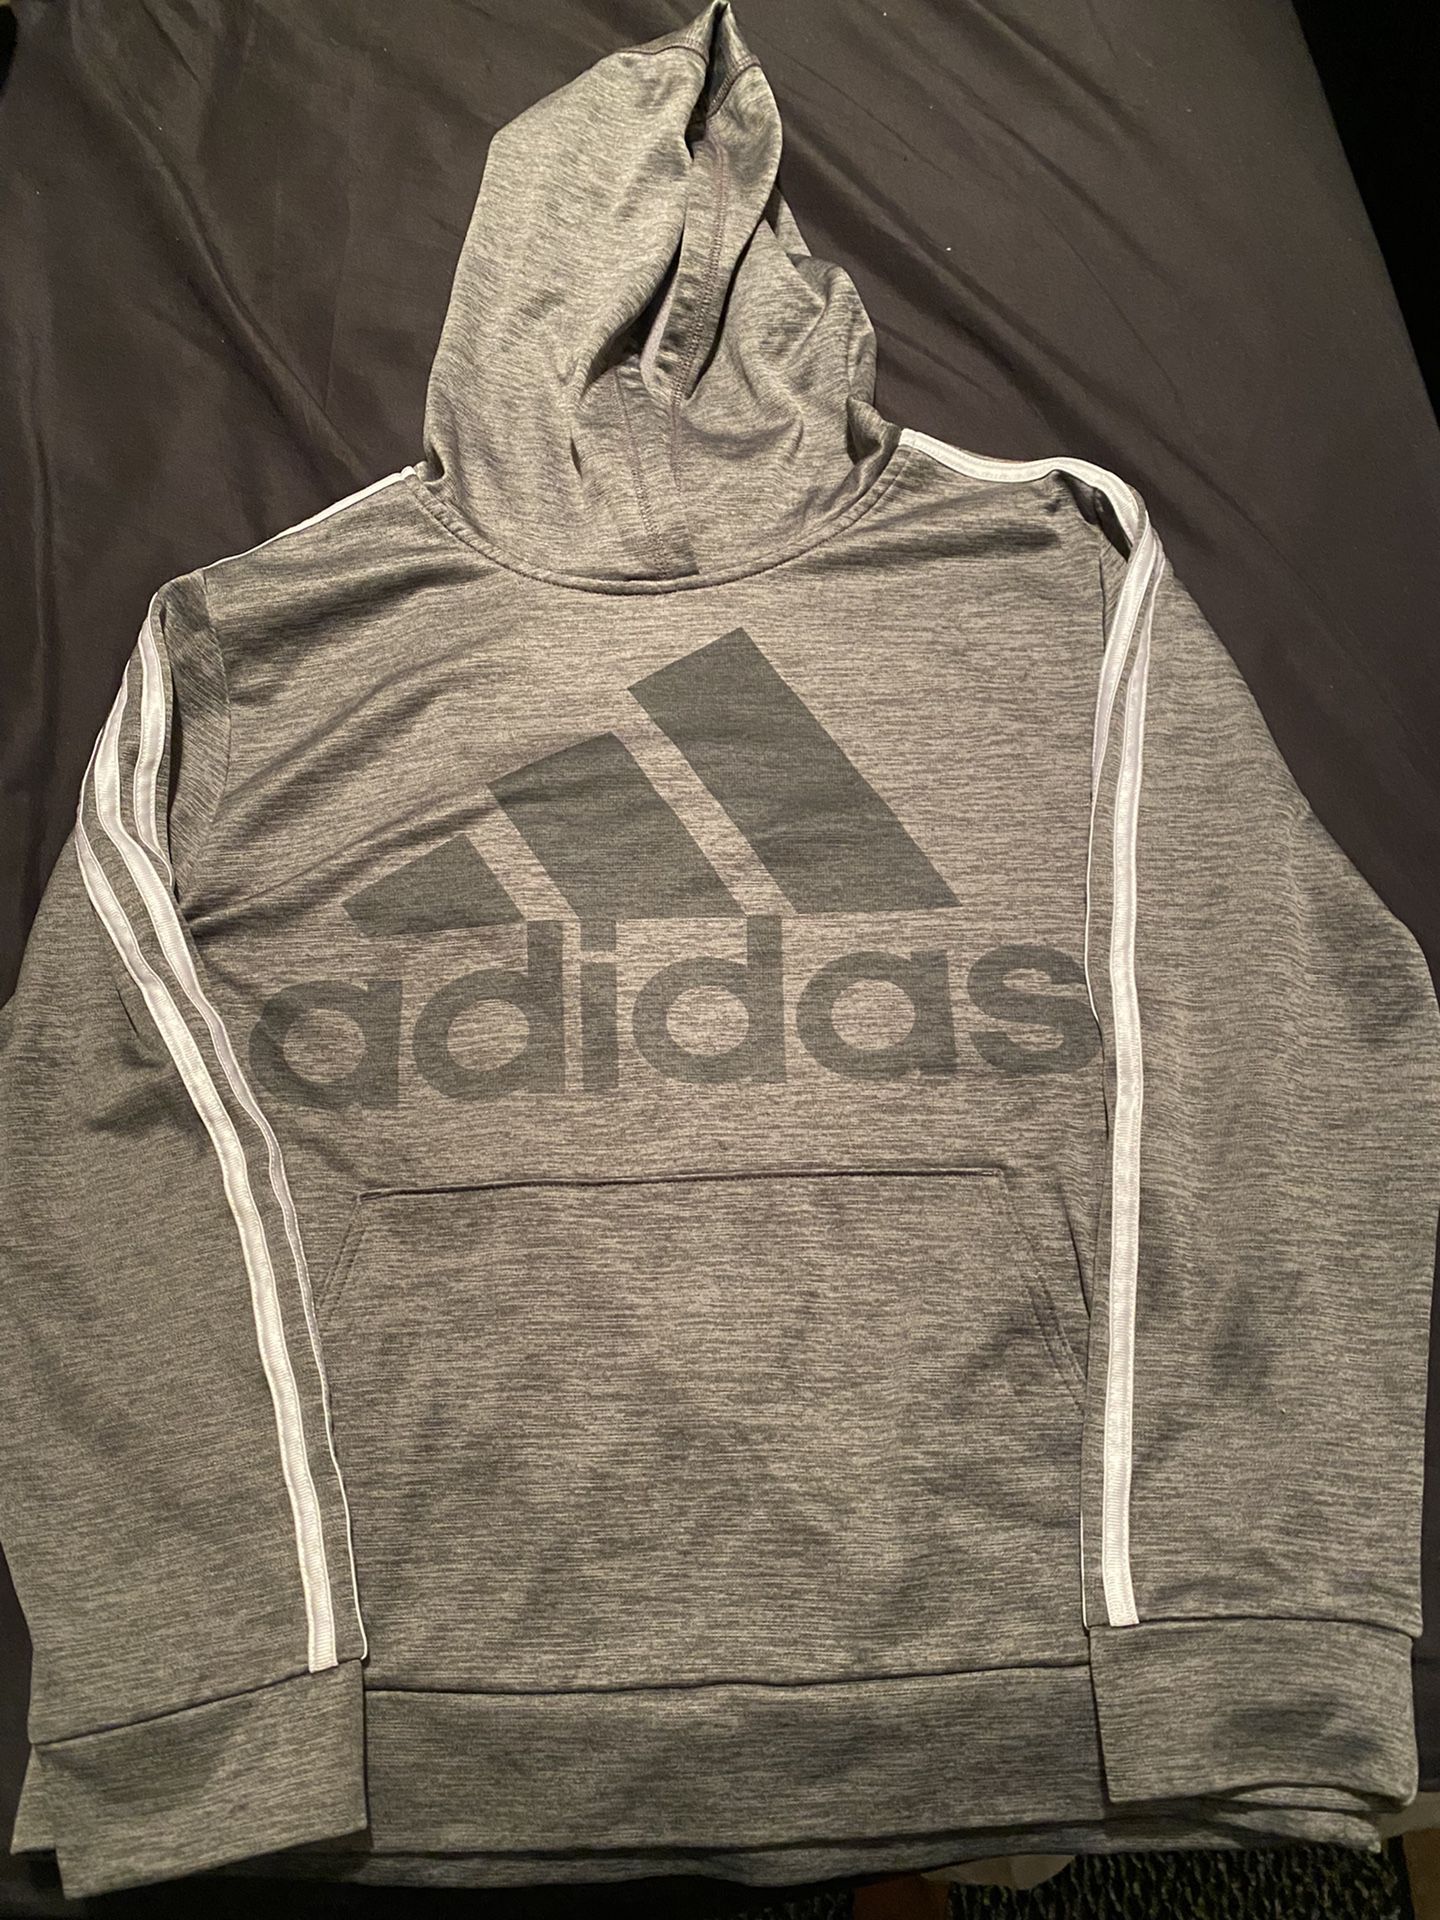 Youth XL Adidas Hoodie in Great Used Condition. Smoke Free Home. 